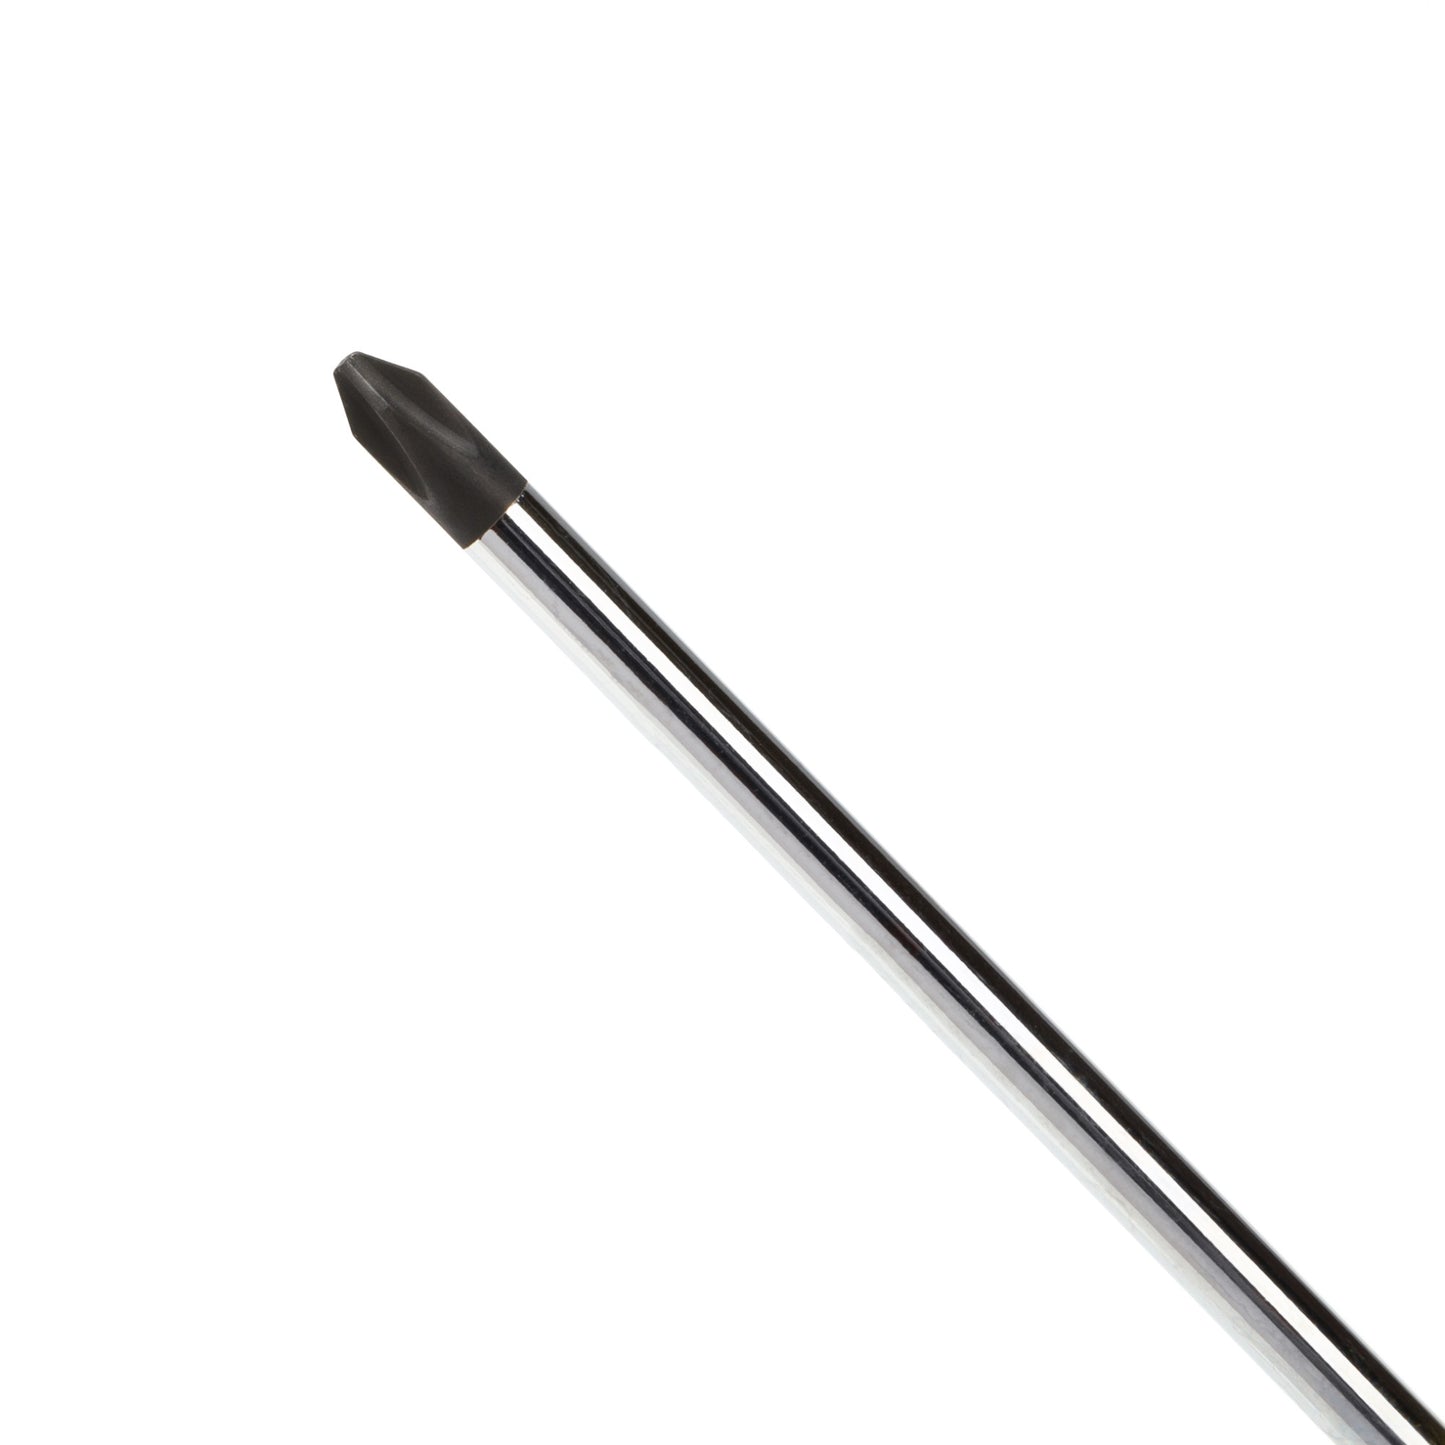 PH2 x 6-Inch Magnetic Philips Tip Screwdriver with Ergonomic Handle